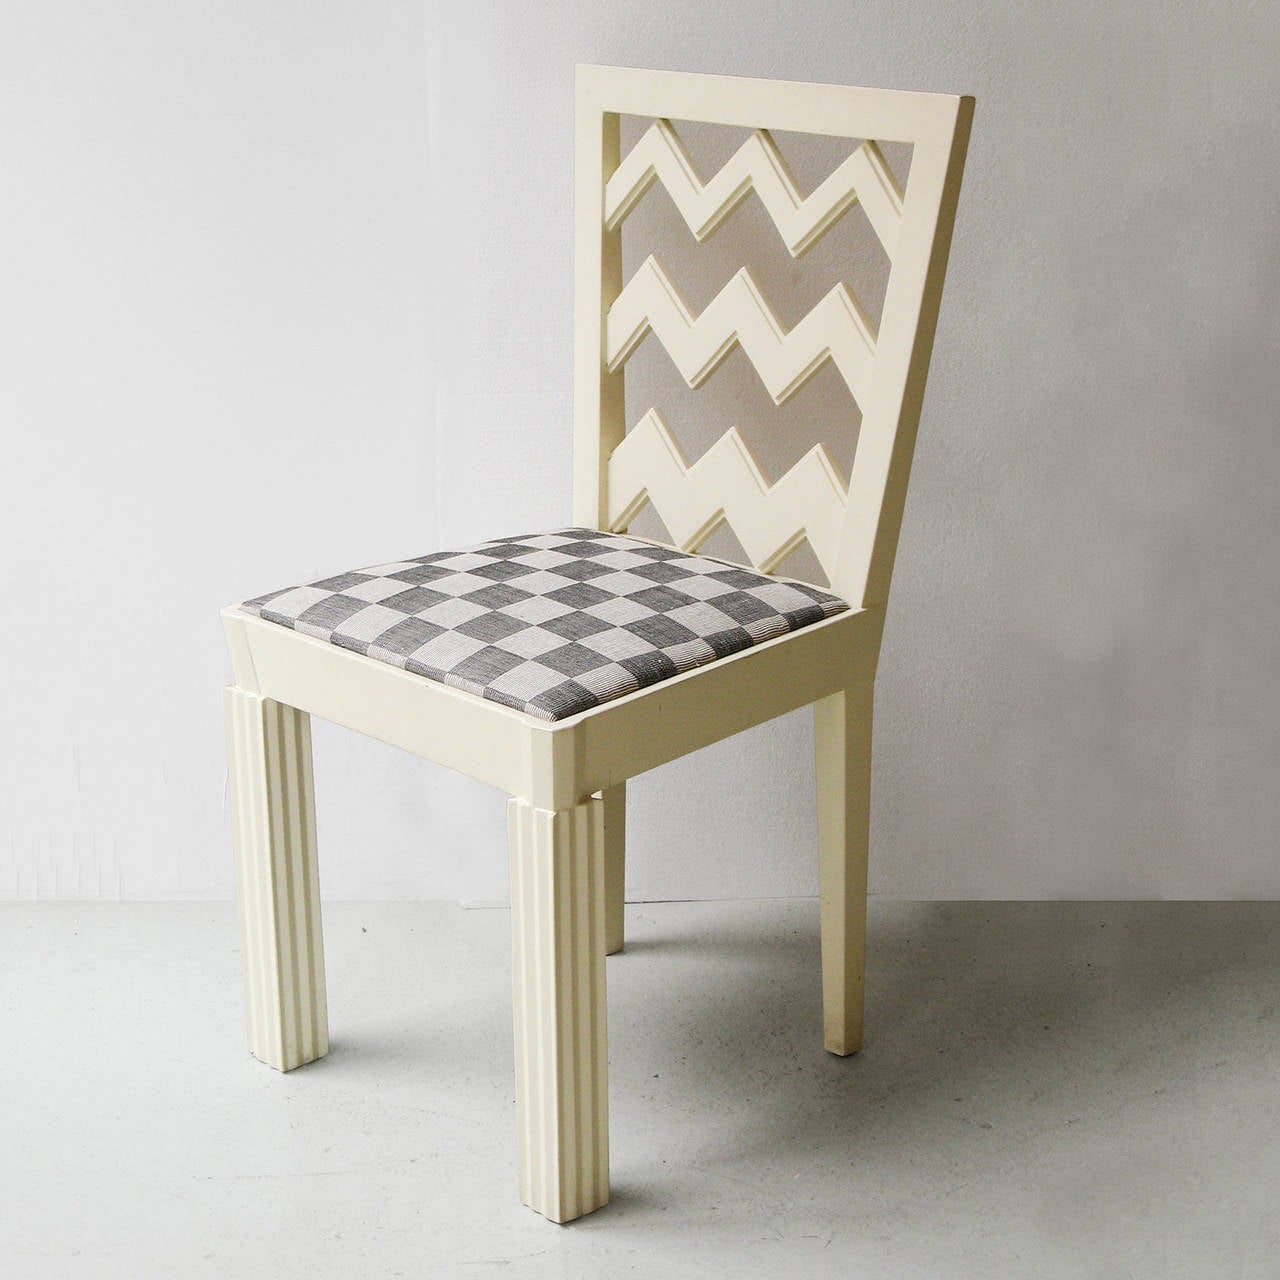 Vienna Secession white lacquered chair attributed to Josef Hoffmann, Austria, circa 1910.
Matching table is available.